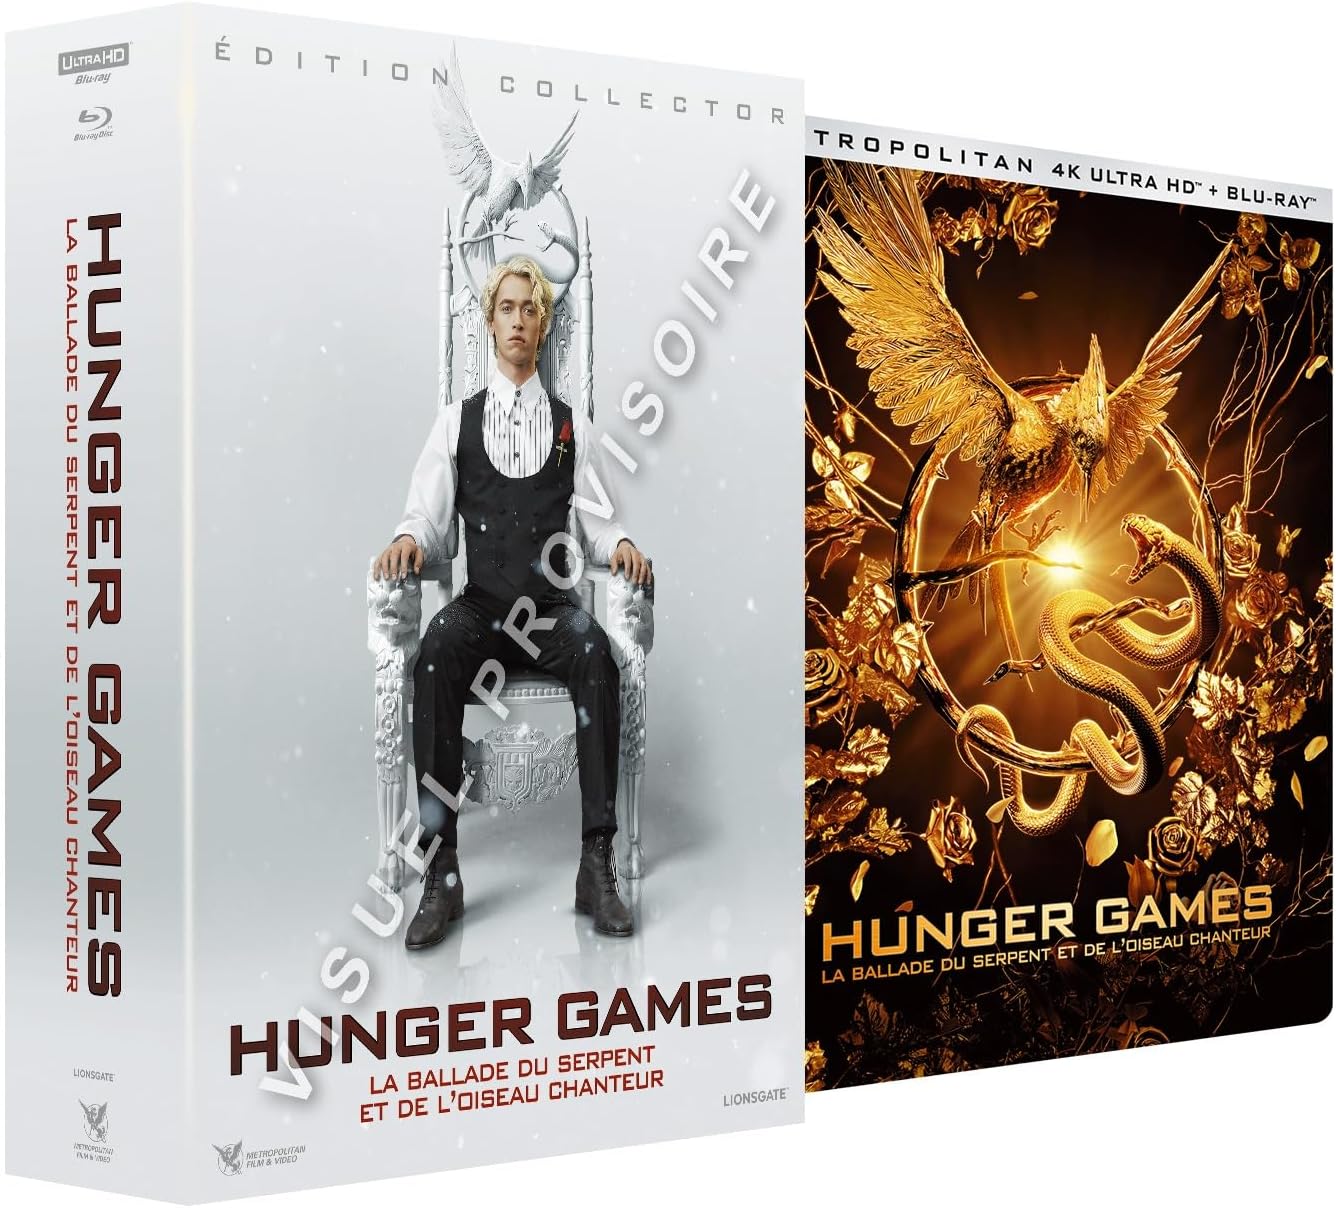 The Hunger Games - 10th Anniversary Collector's Edition (Blu-ray Box Set)  [Italy]